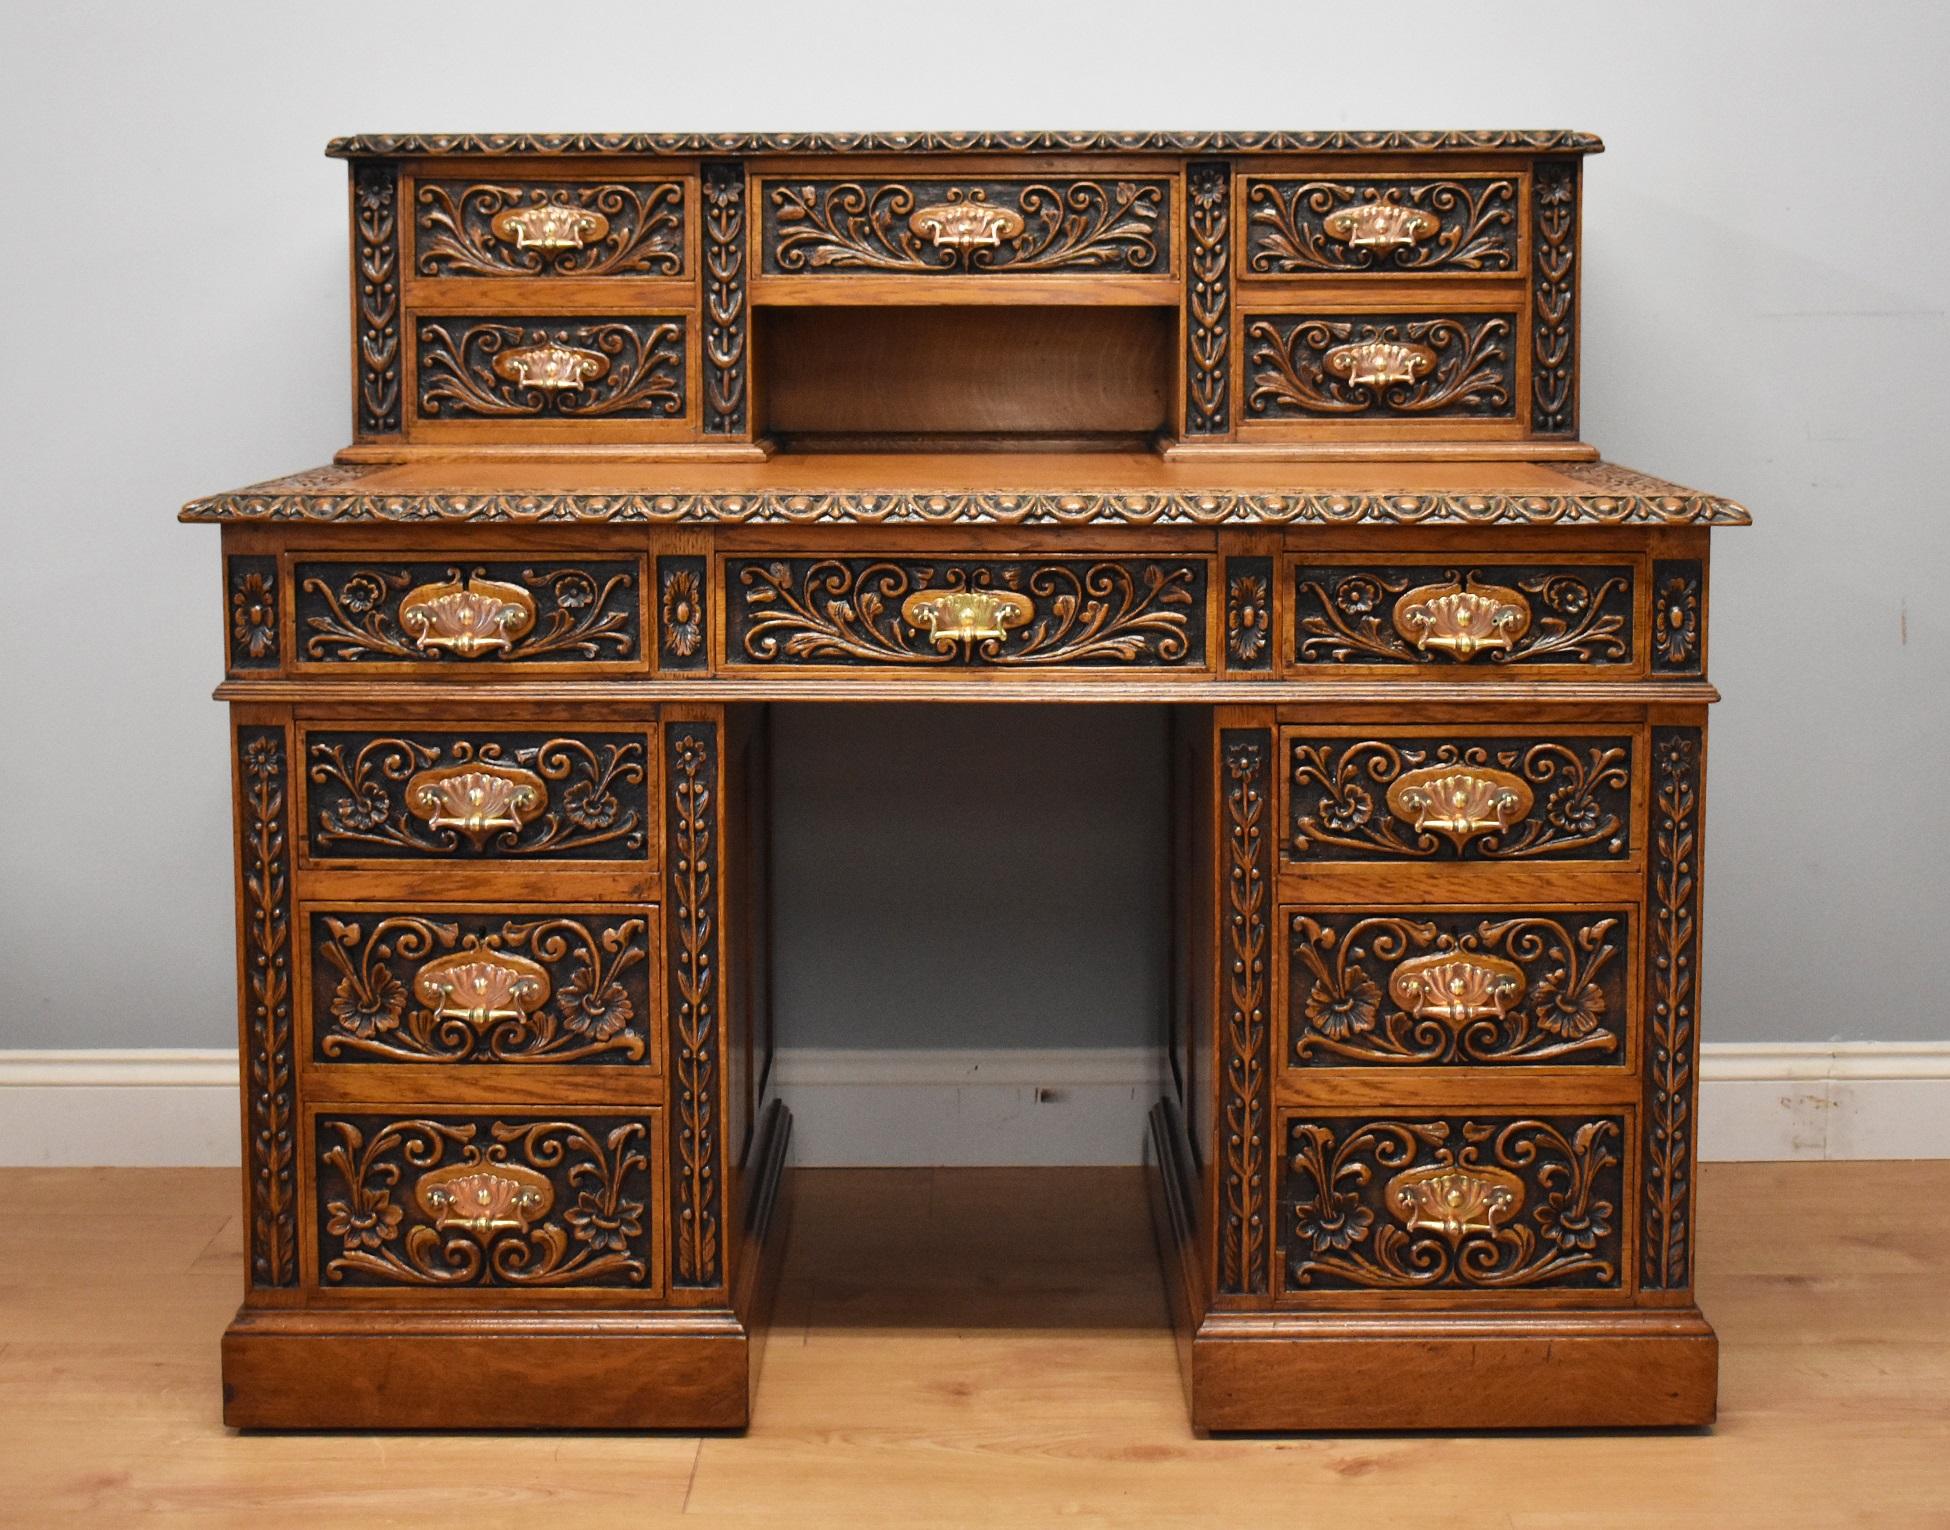 For sale is a good quality Victorian solid oak carved pedestal desk. The top of the desk has an arrangement of five drawers, each profusely carved and has very decorative copper handles. Below this is a brown leather insert with decorative tooling.